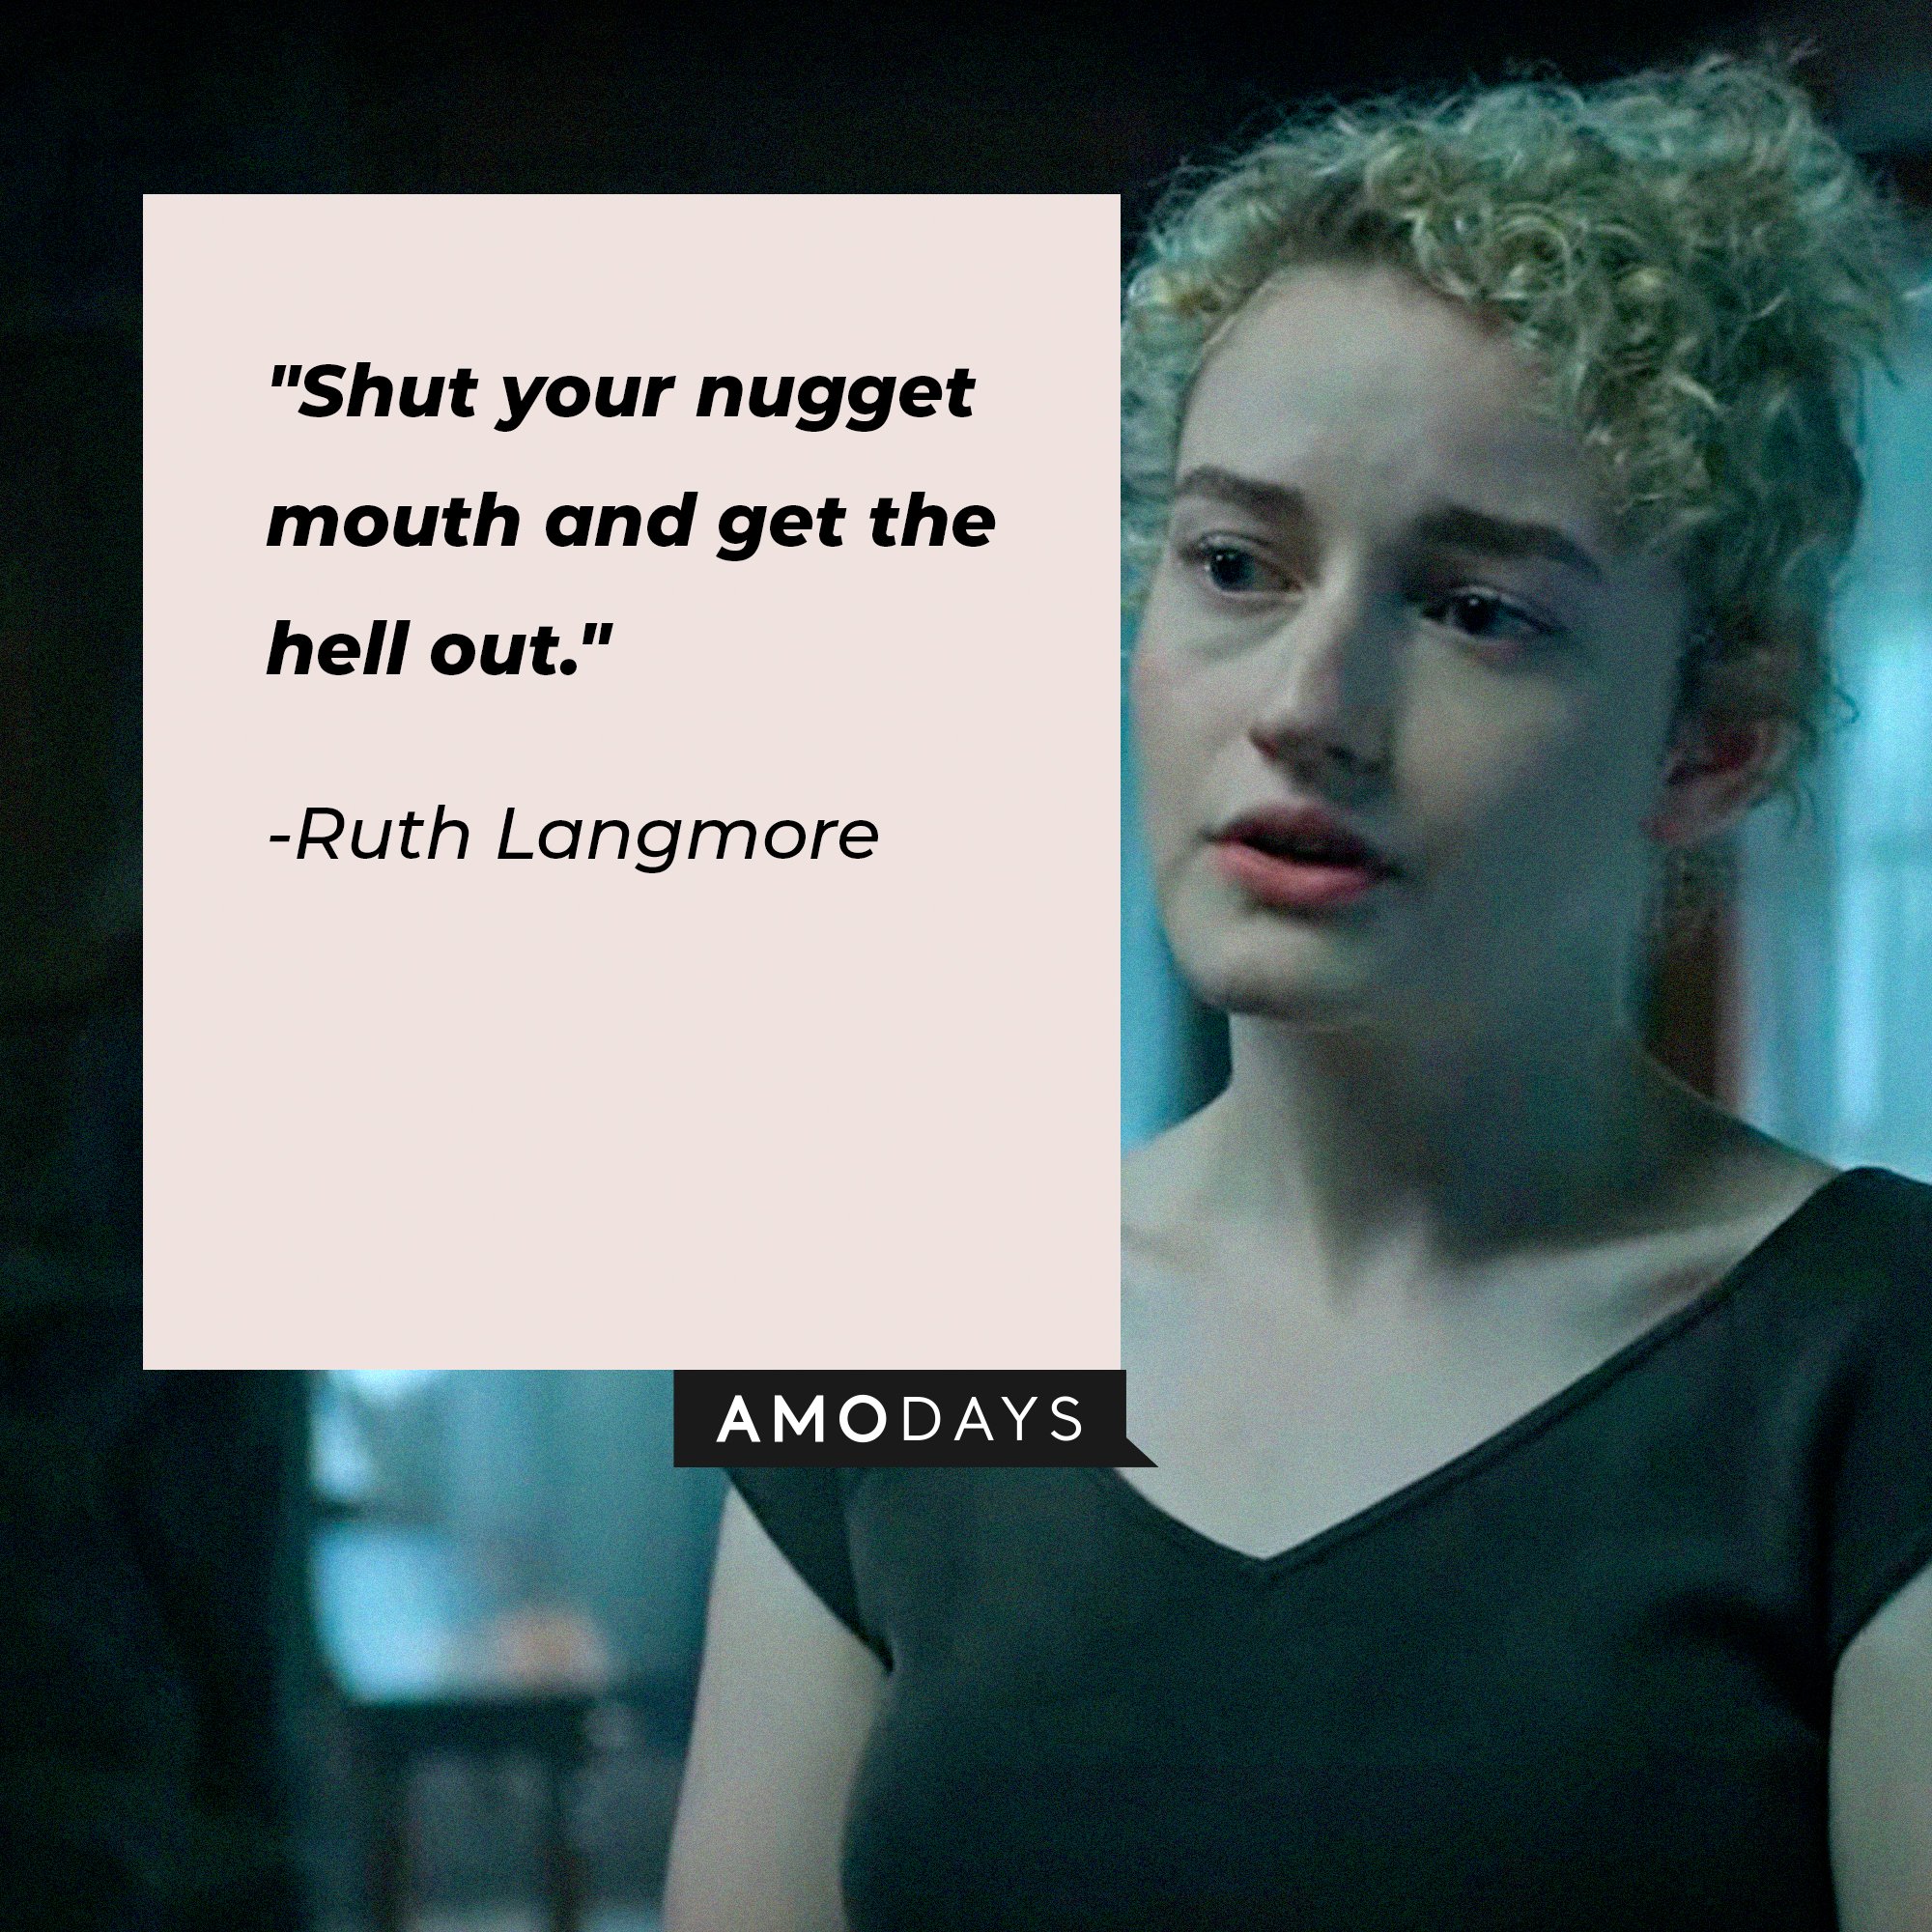  Ruth Langmore’s quote: "Shut your nugget mouth and get the hell out."  | Image: AmoDays